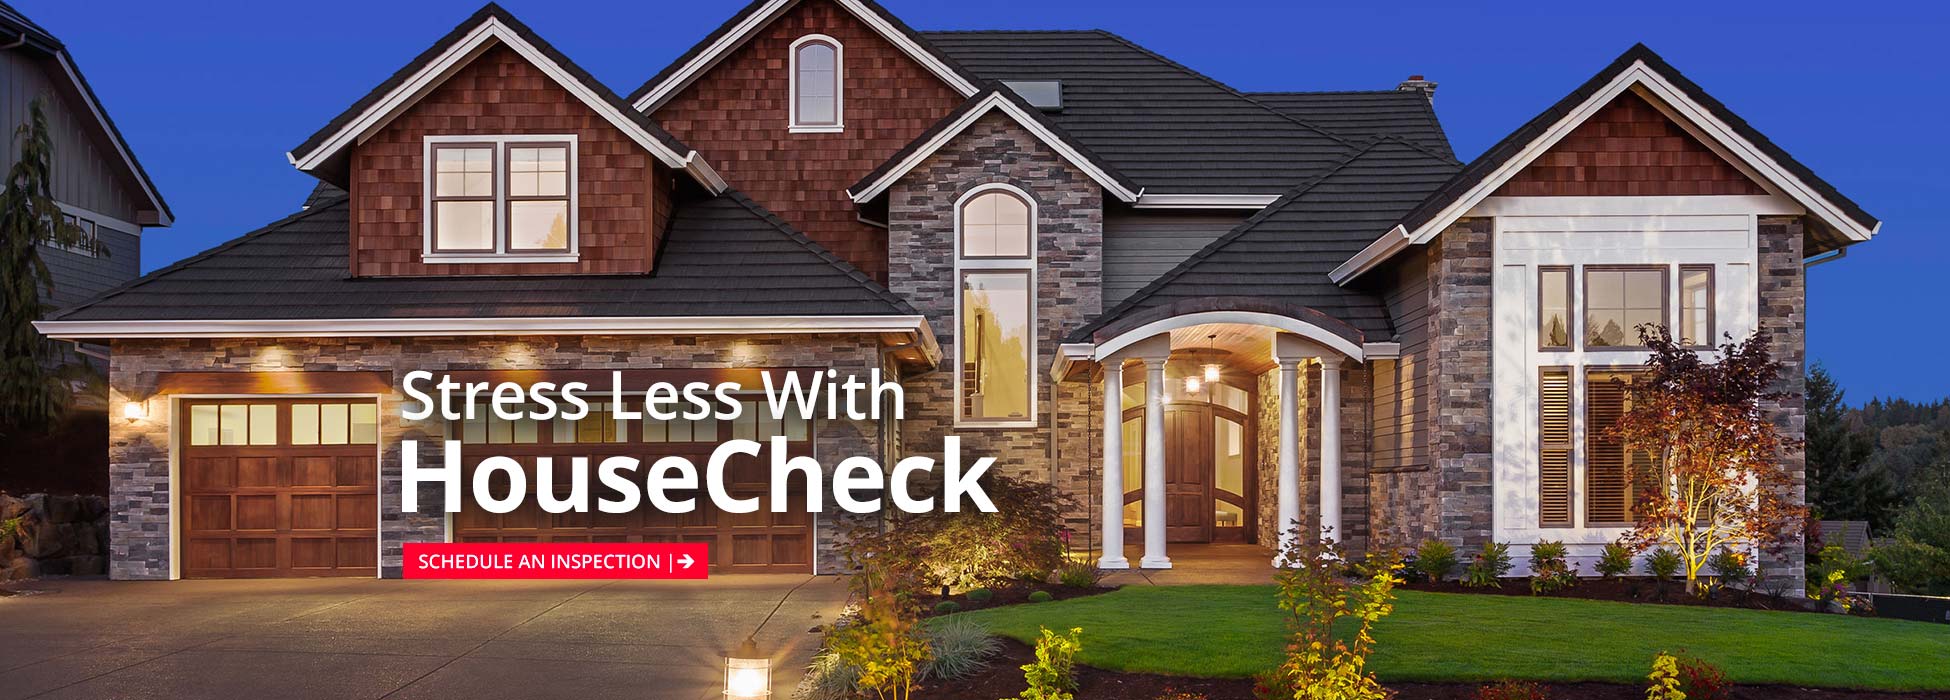 stress less with housecheck